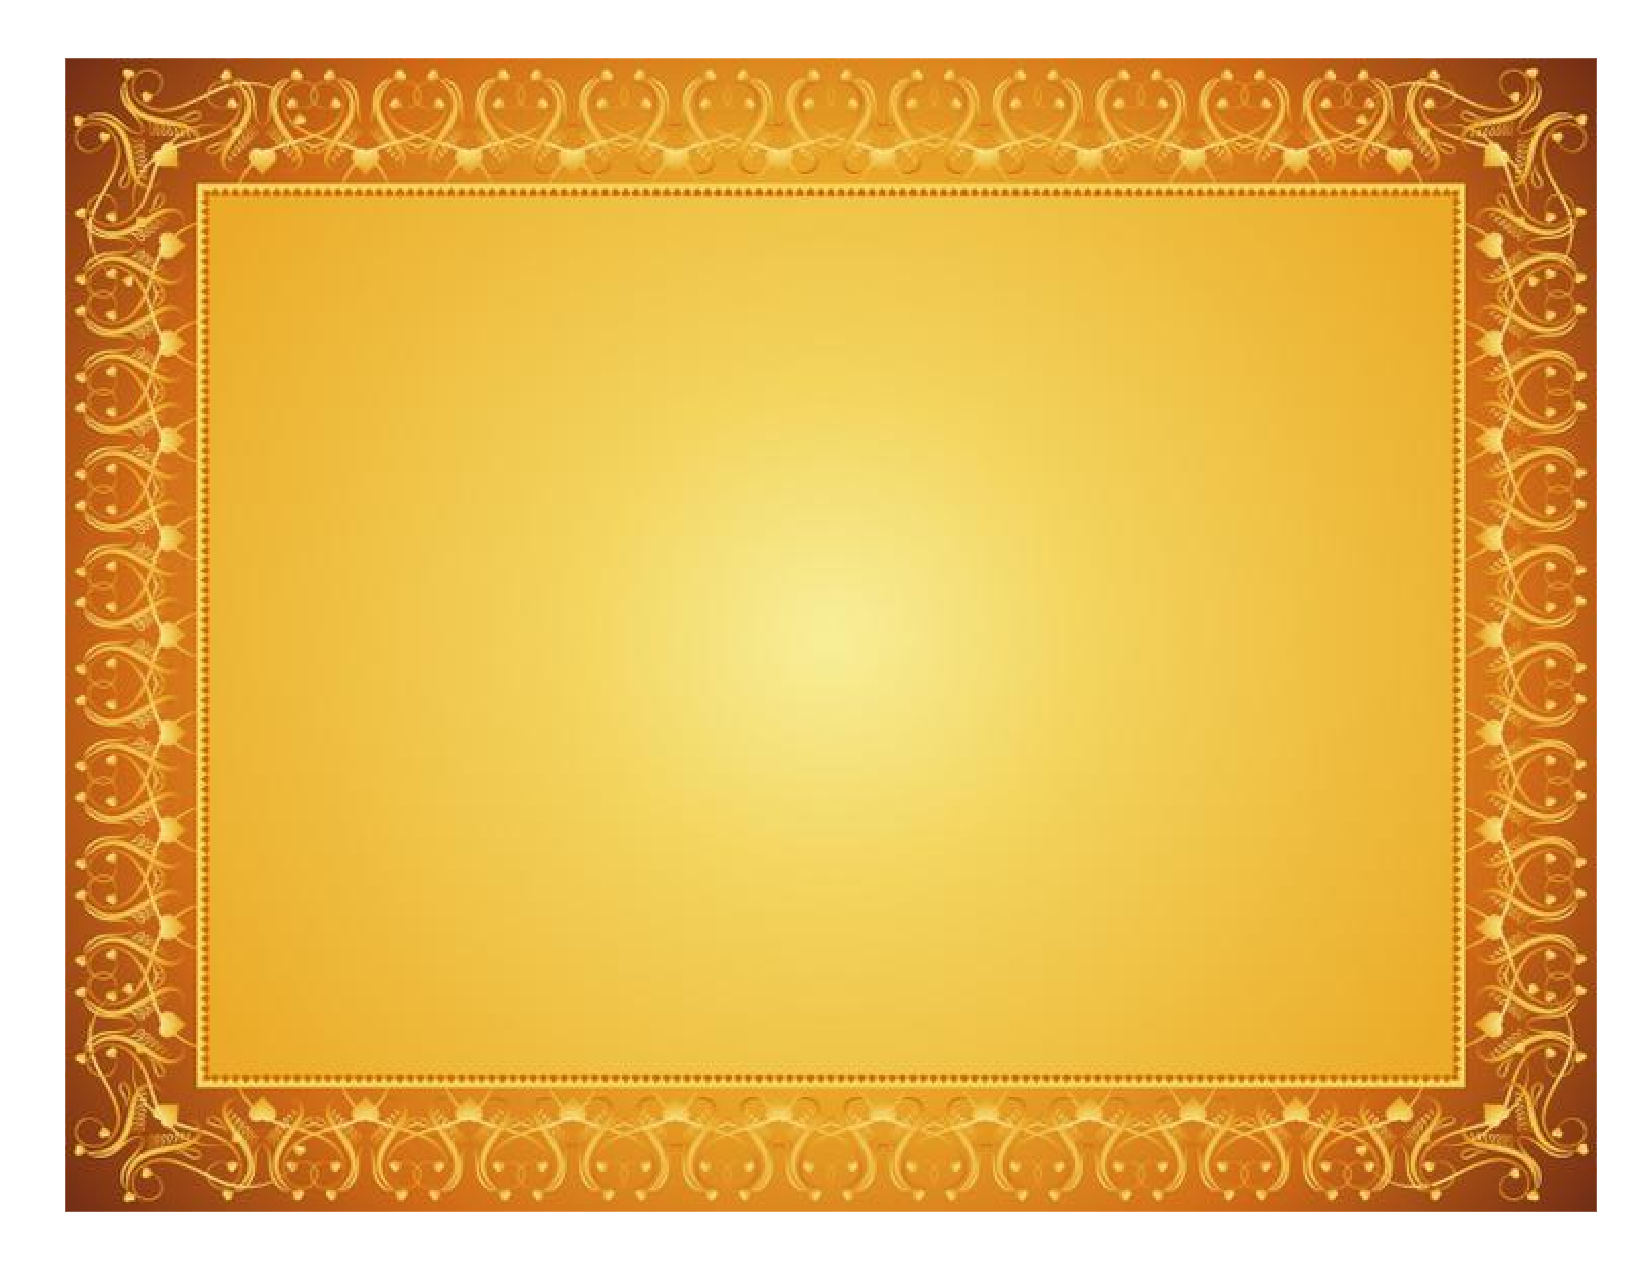 Certificate Template PNG Transparent Images PNG All